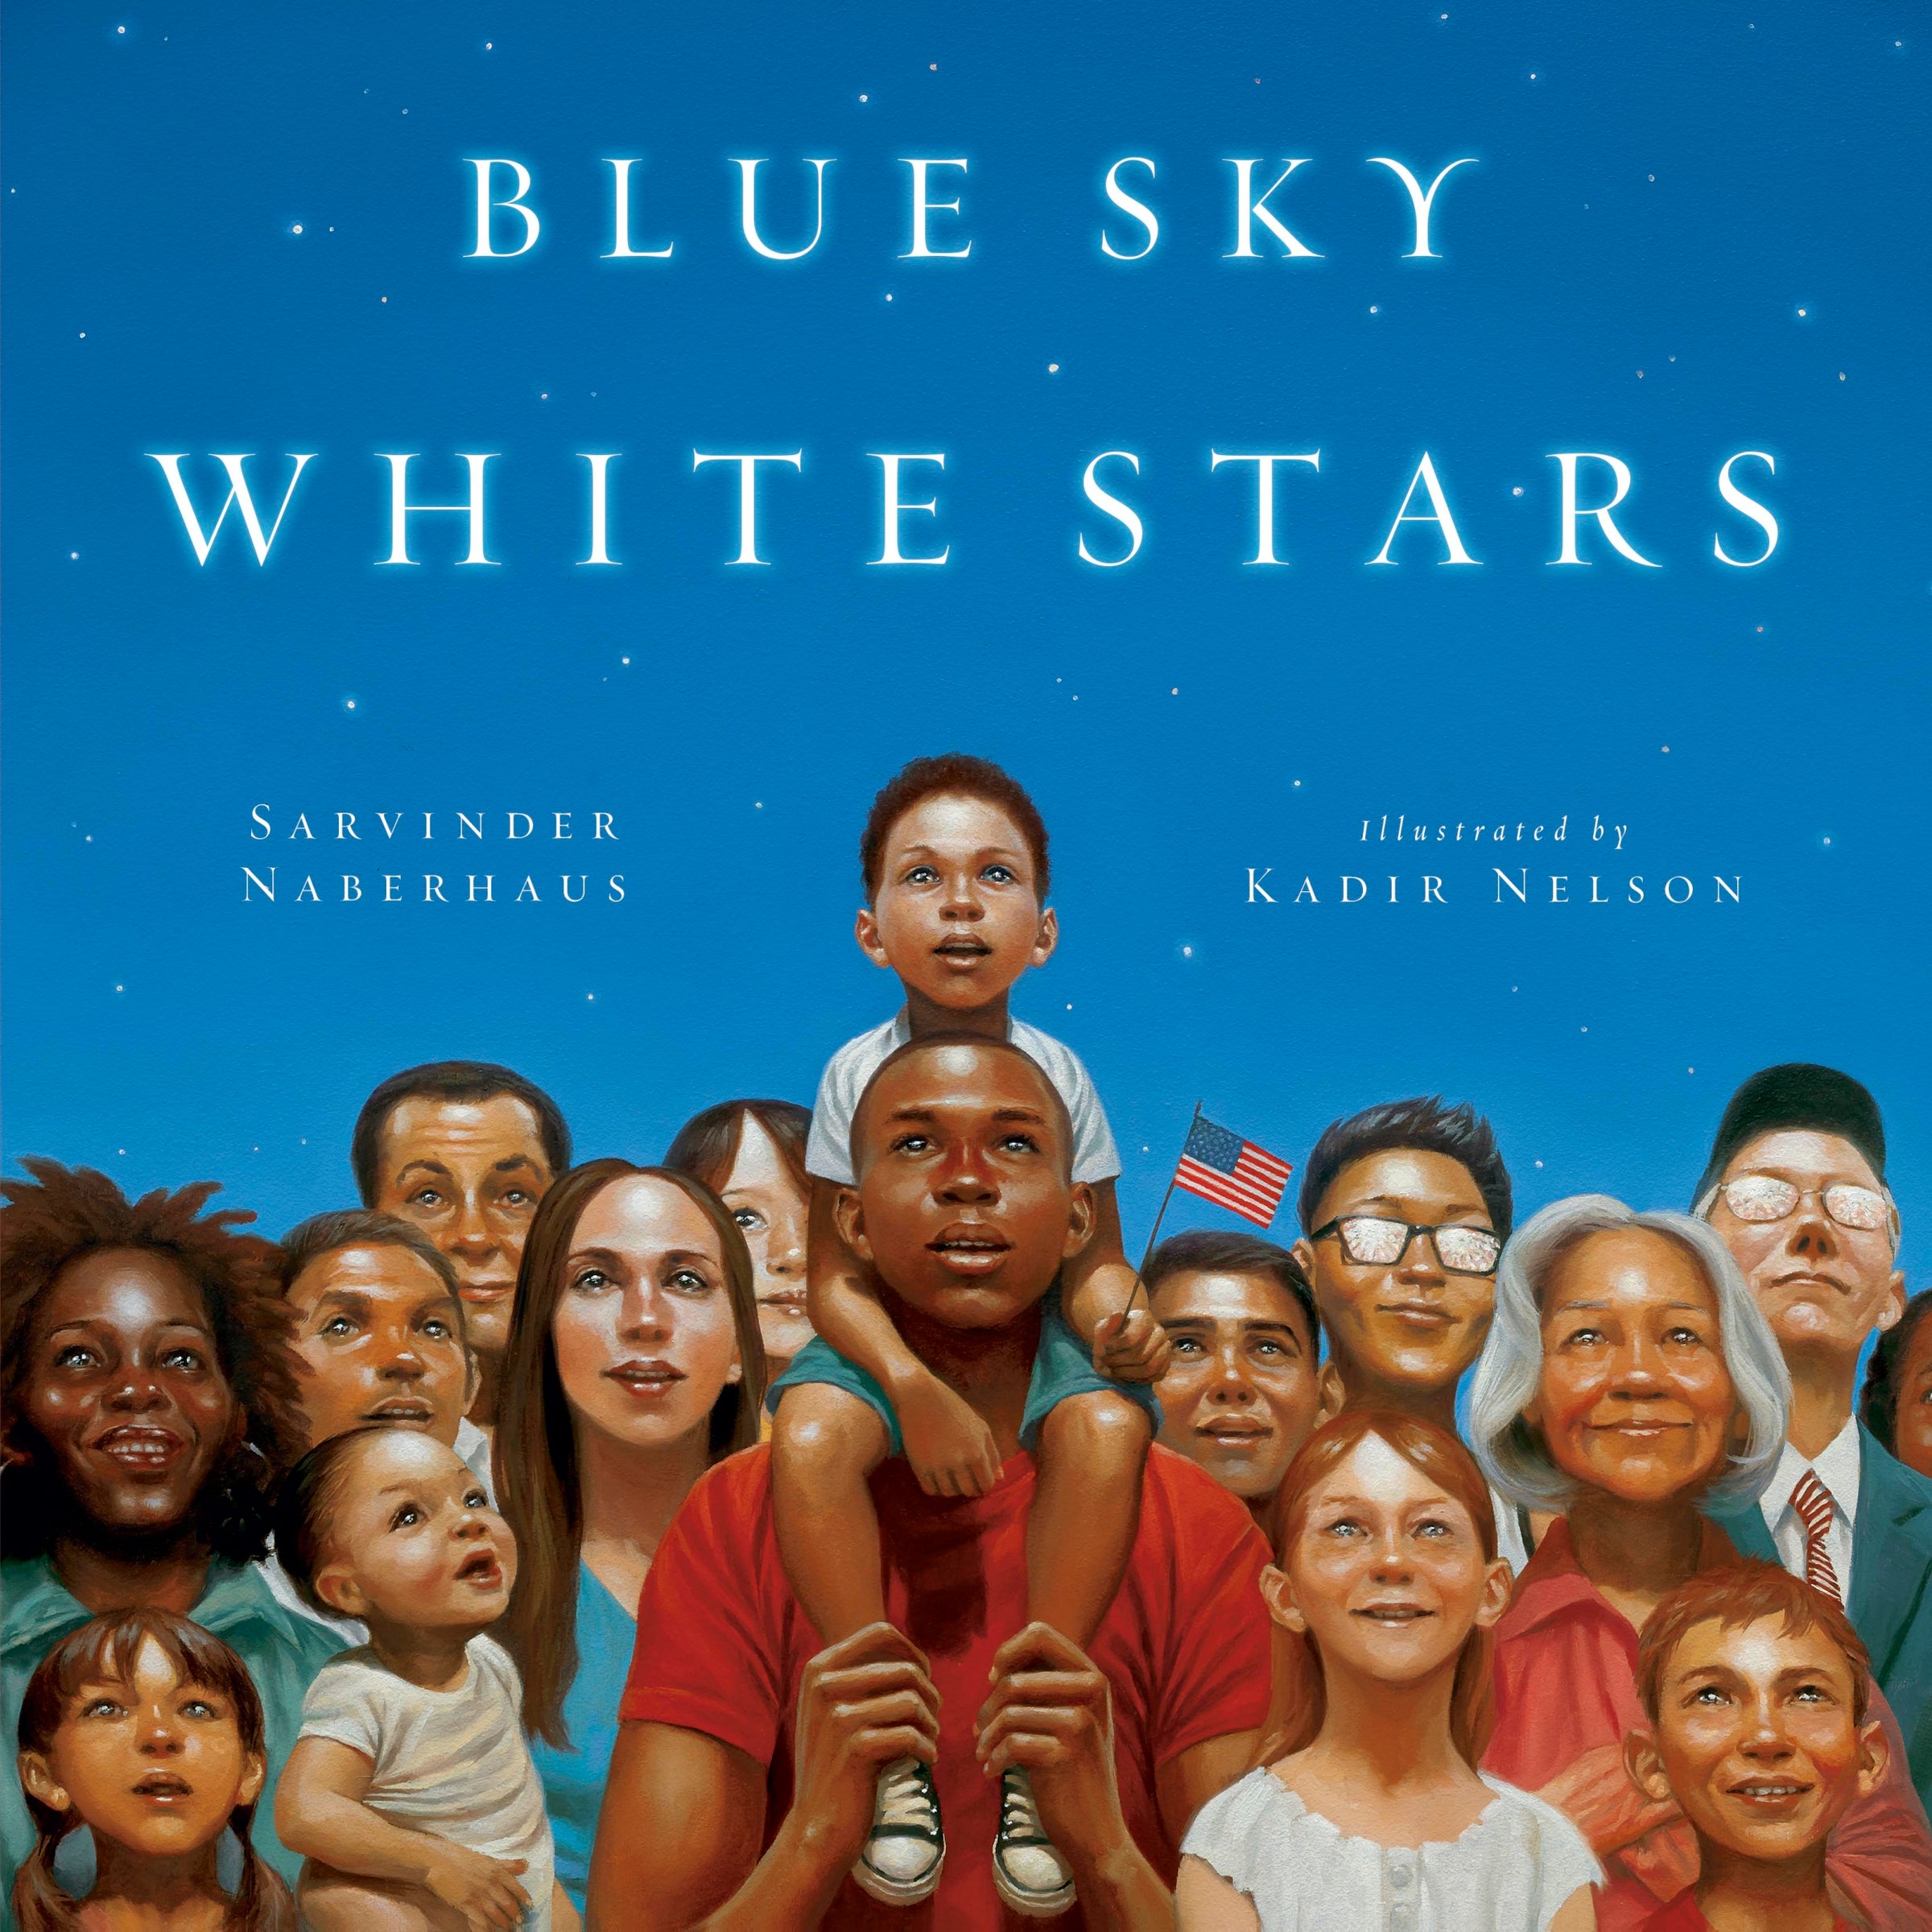 BLUE SKY, WHITE STARS by Sarvinder Naberhaus and illustrated by Kadir  Nelson.